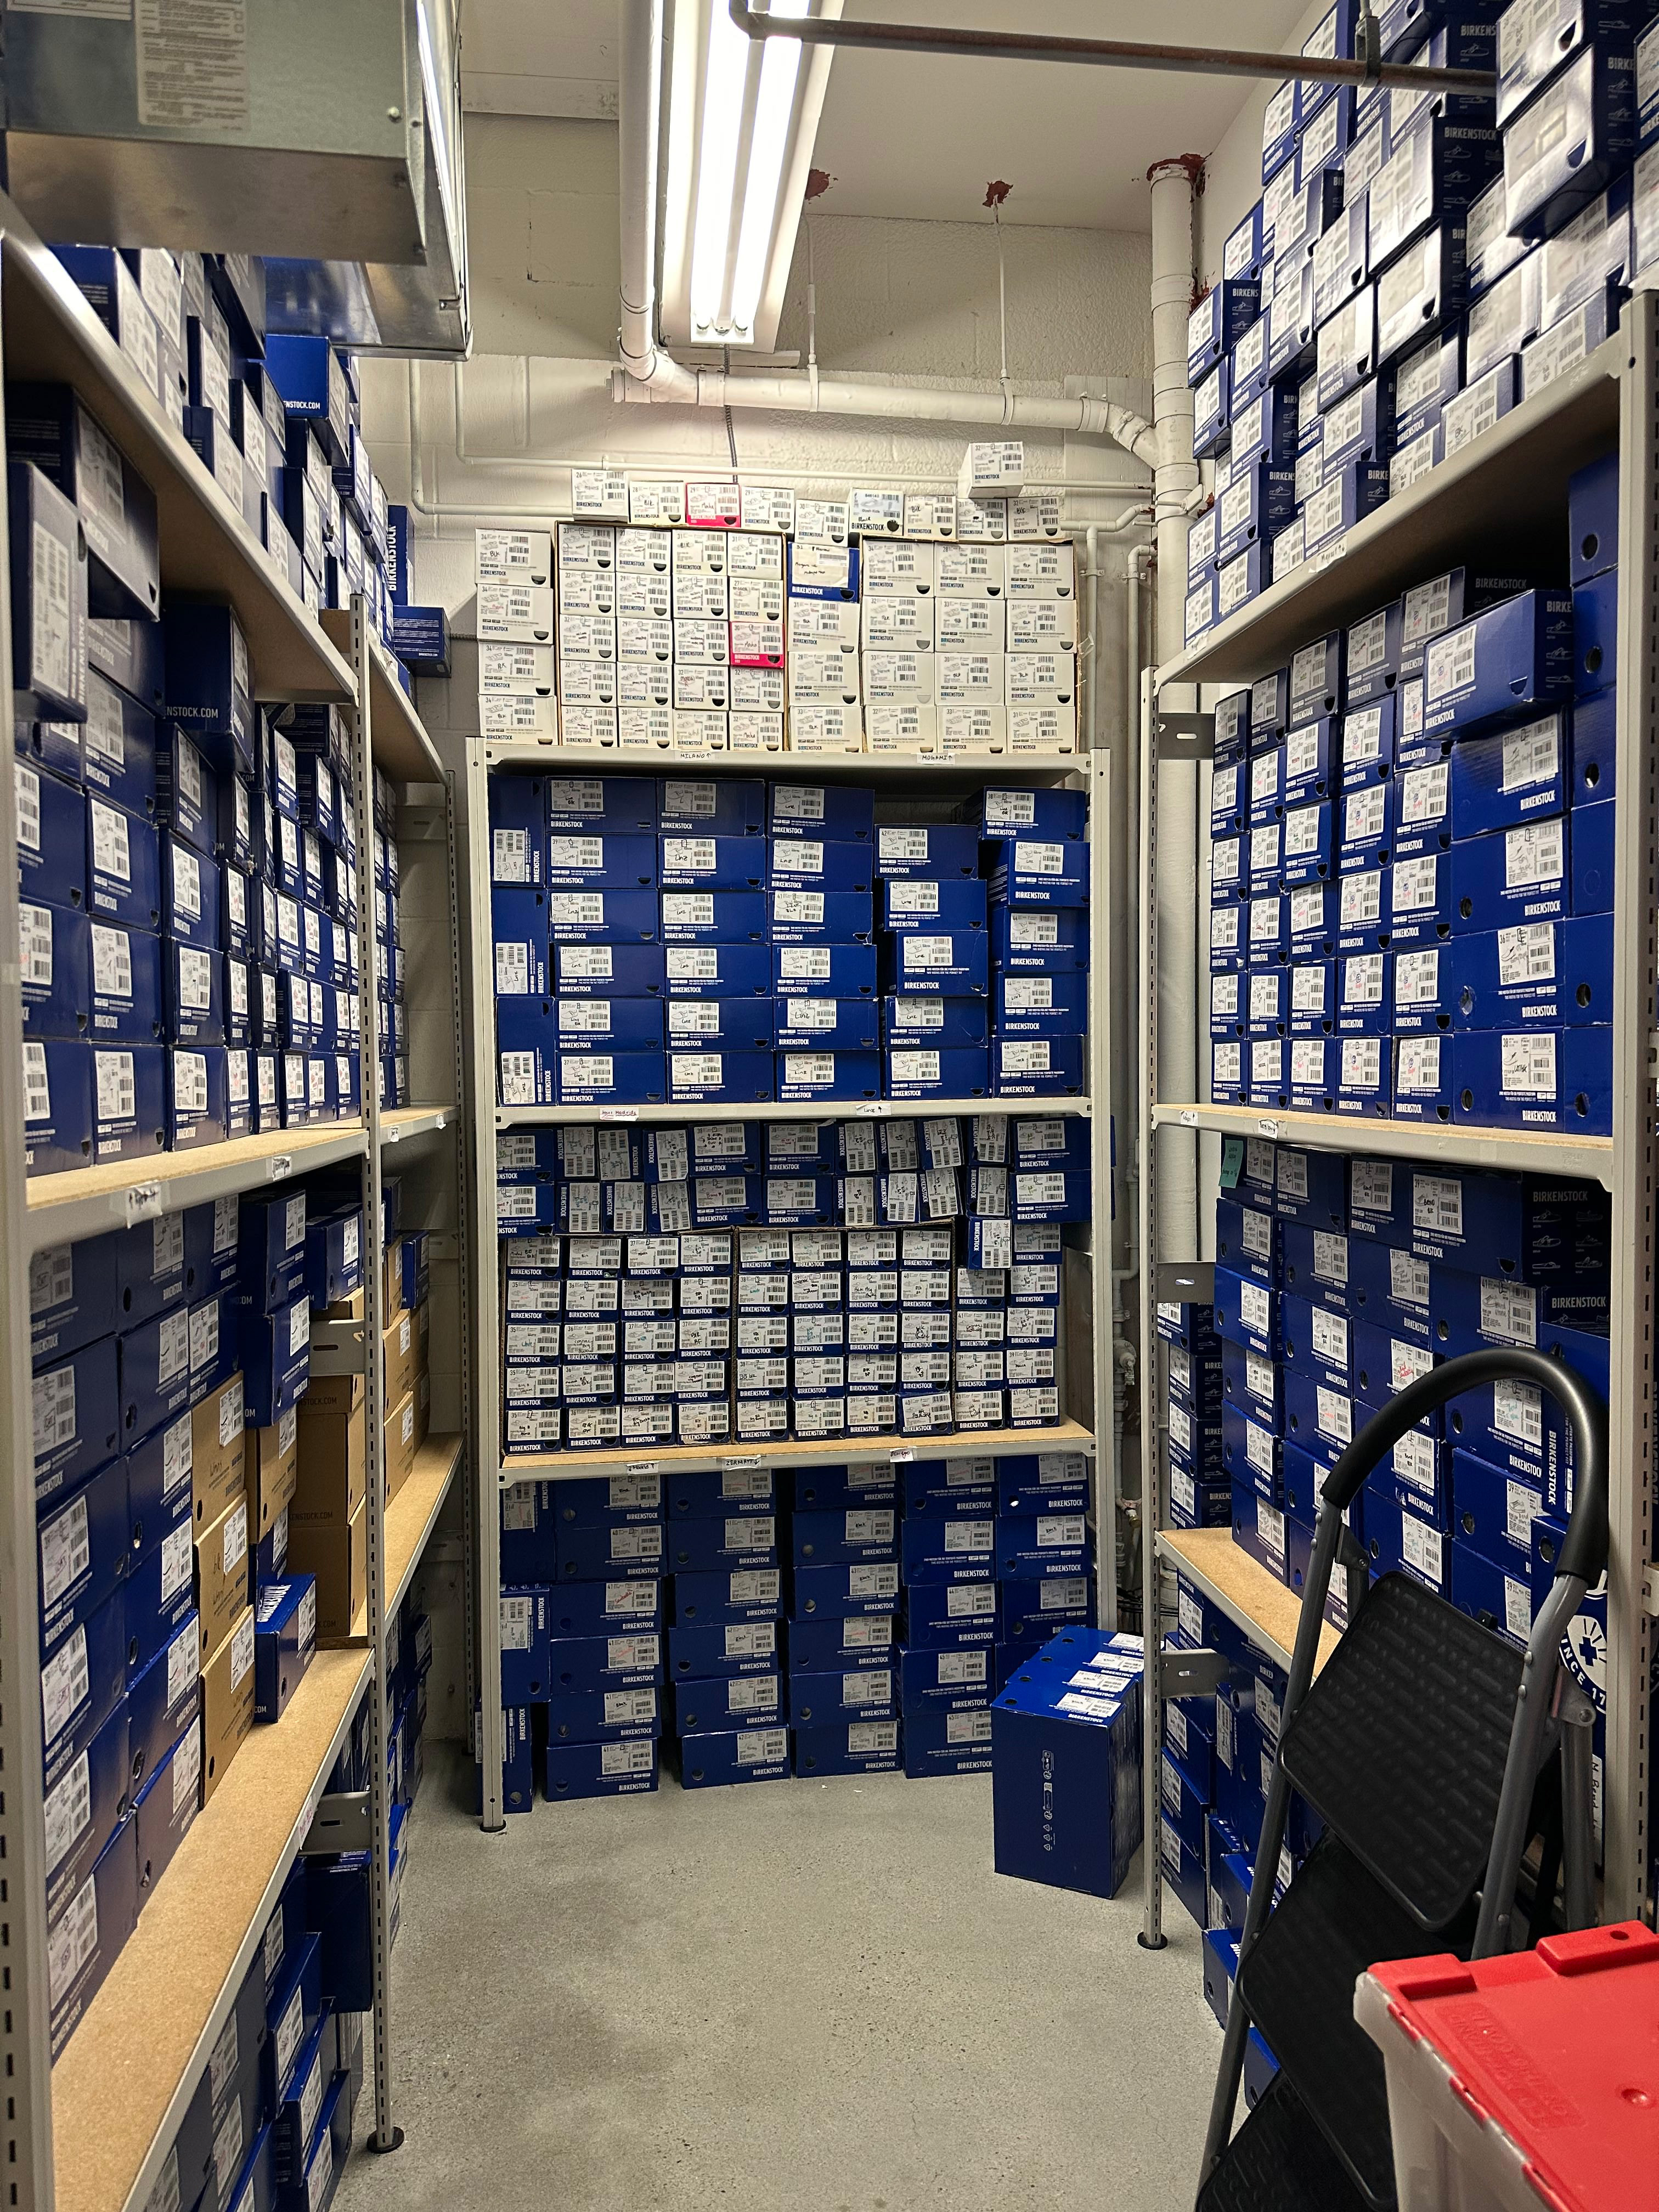 Getting involved in inventory organization and management by keeping the same shoe models together and counting shoes to be transferred from the warehouse to the store or vice versa.